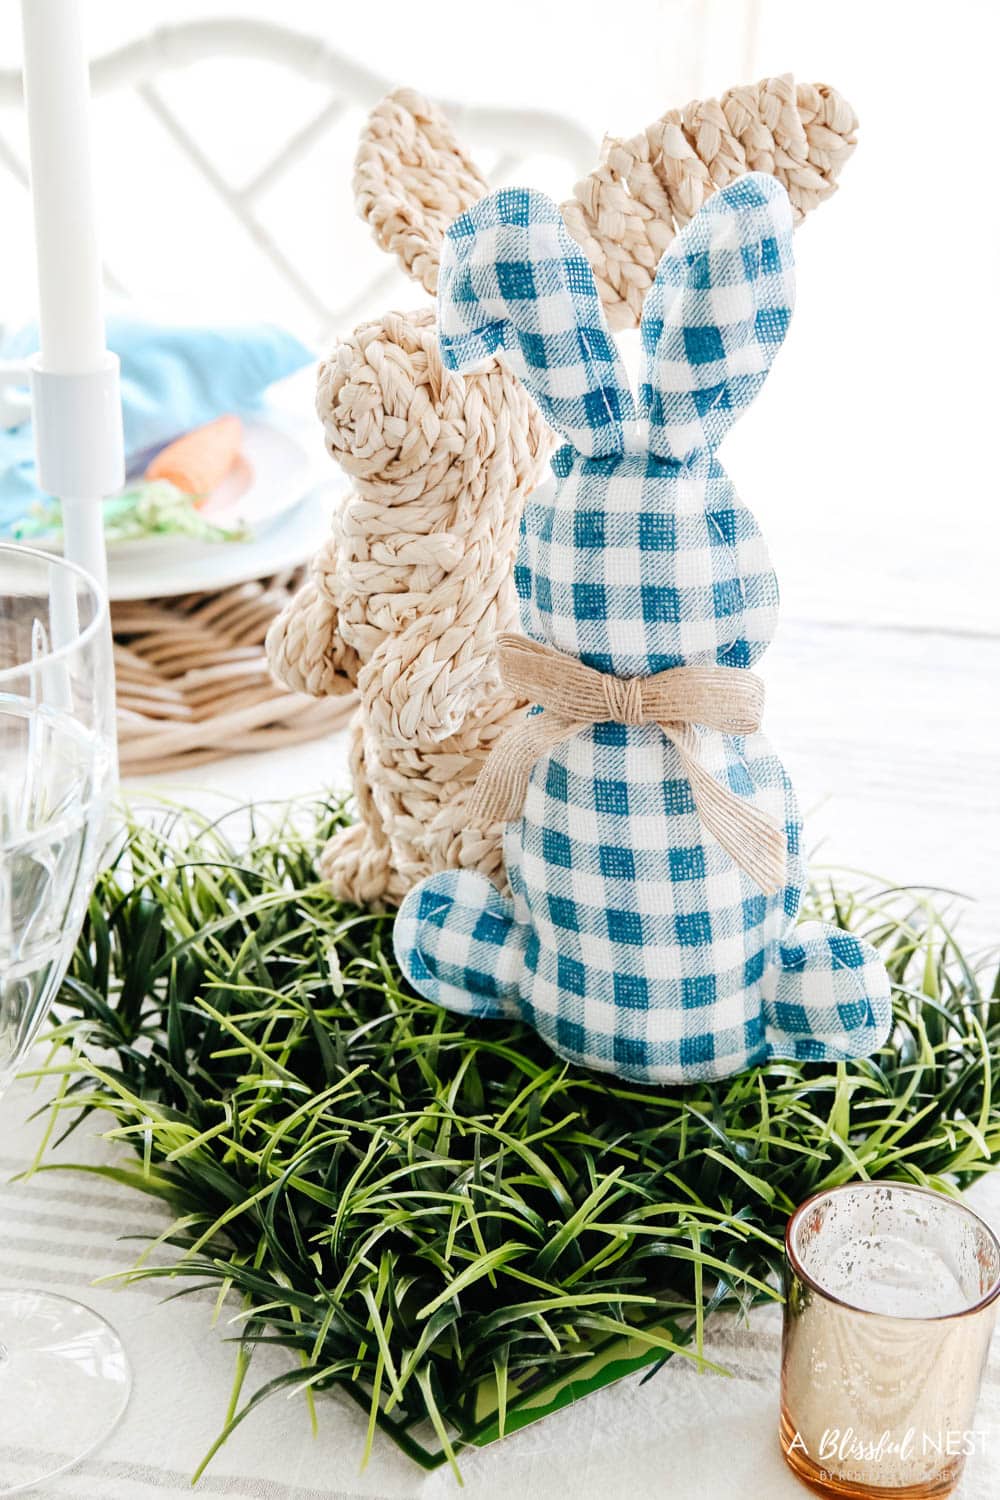 Blue and white gingham check bunny sitting on a grass mat